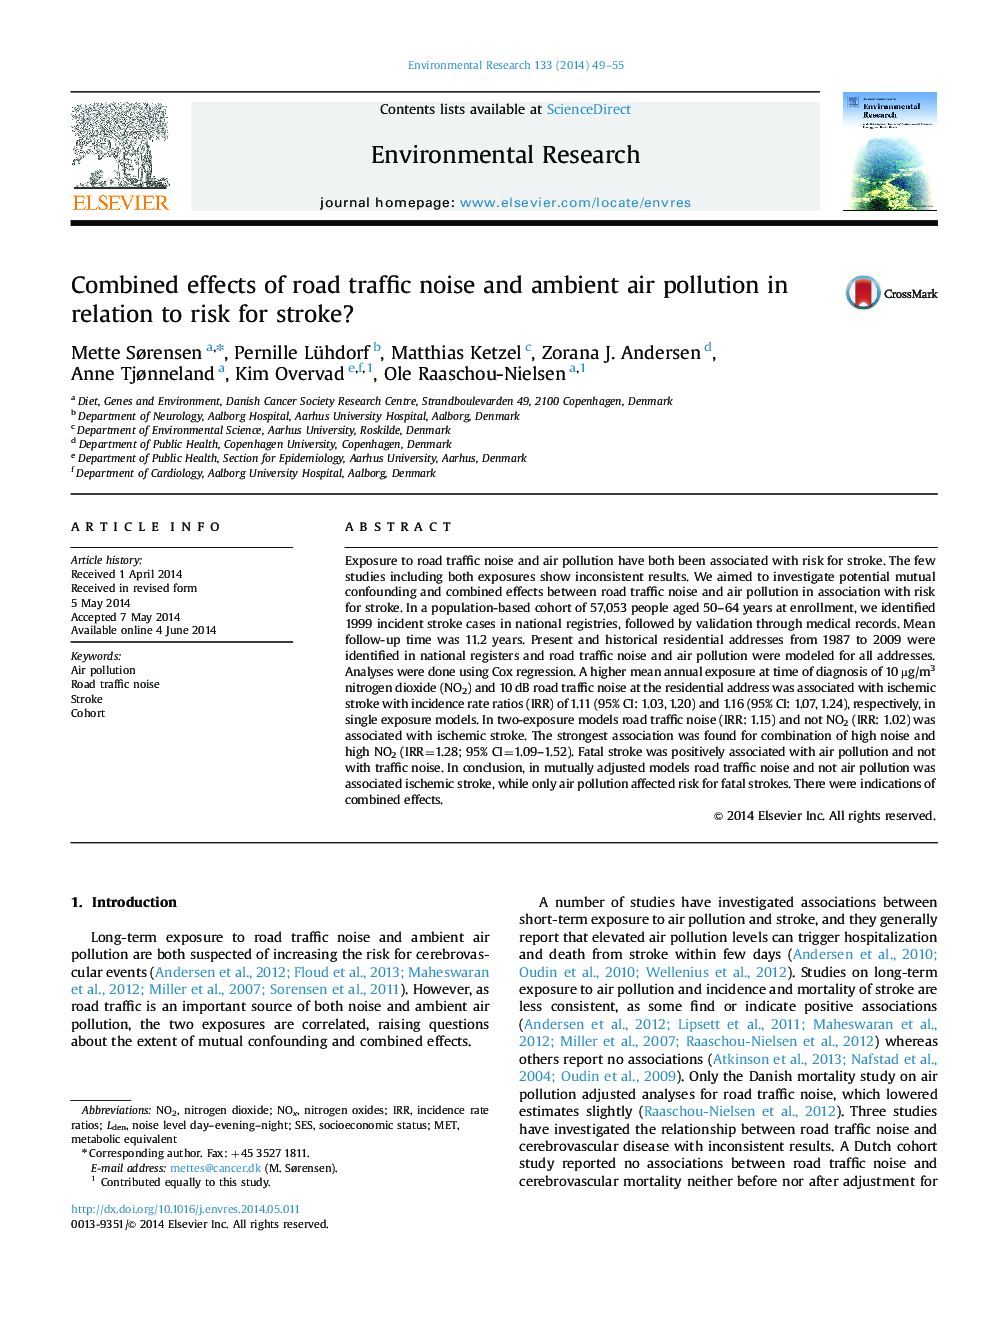 Combined effects of road traffic noise and ambient air pollution in relation to risk for stroke?